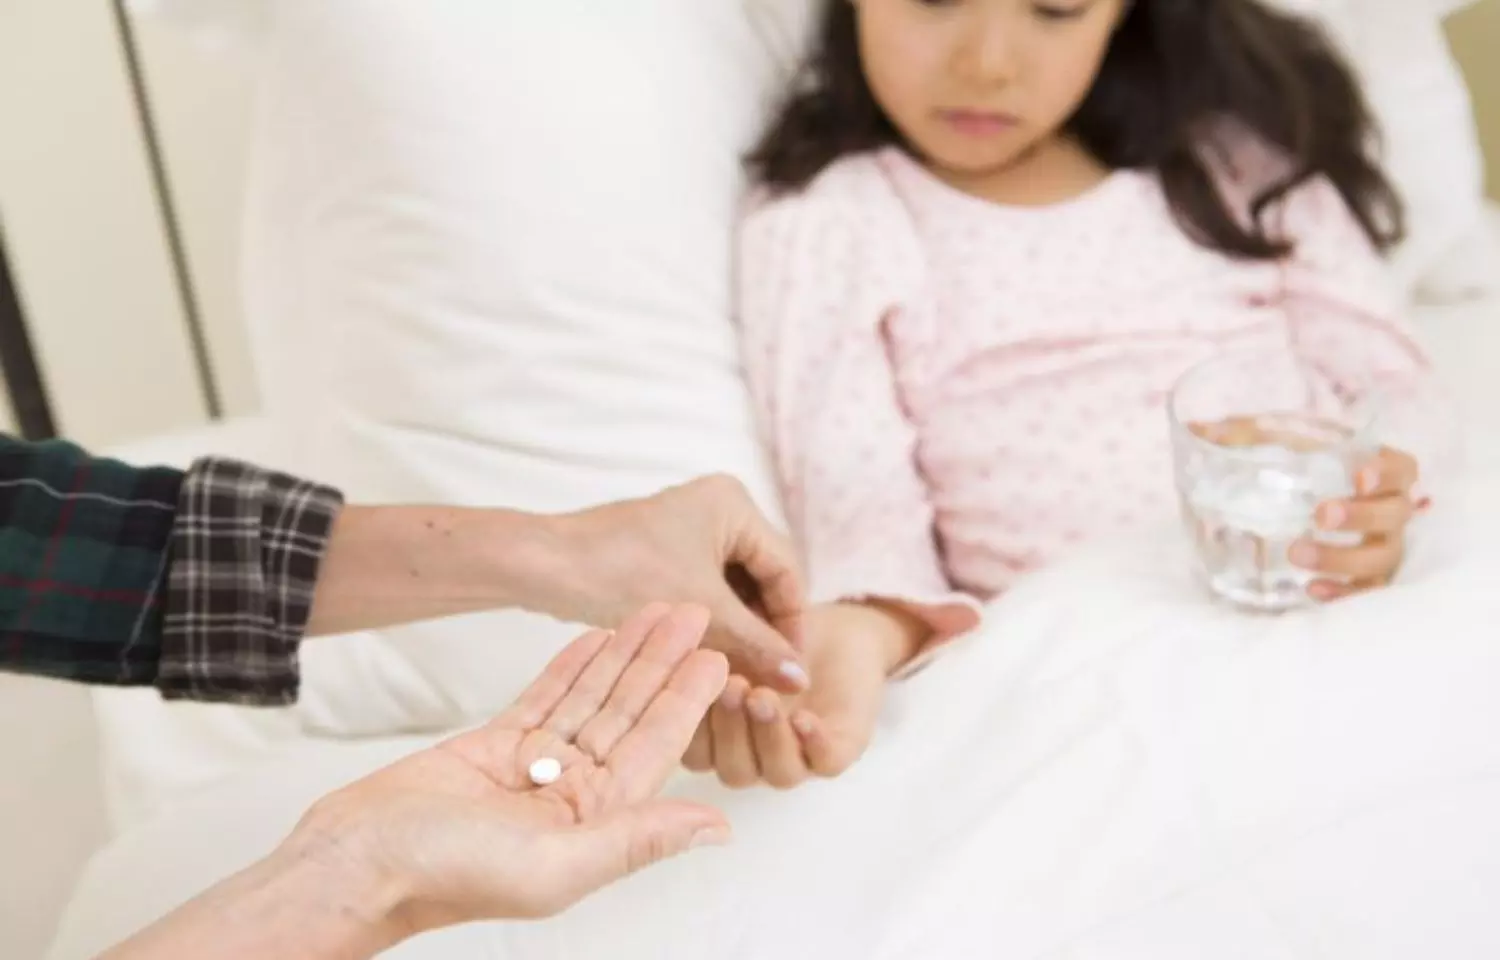 Early RAAS initiation beneficial for children with lupus nephritis: Study